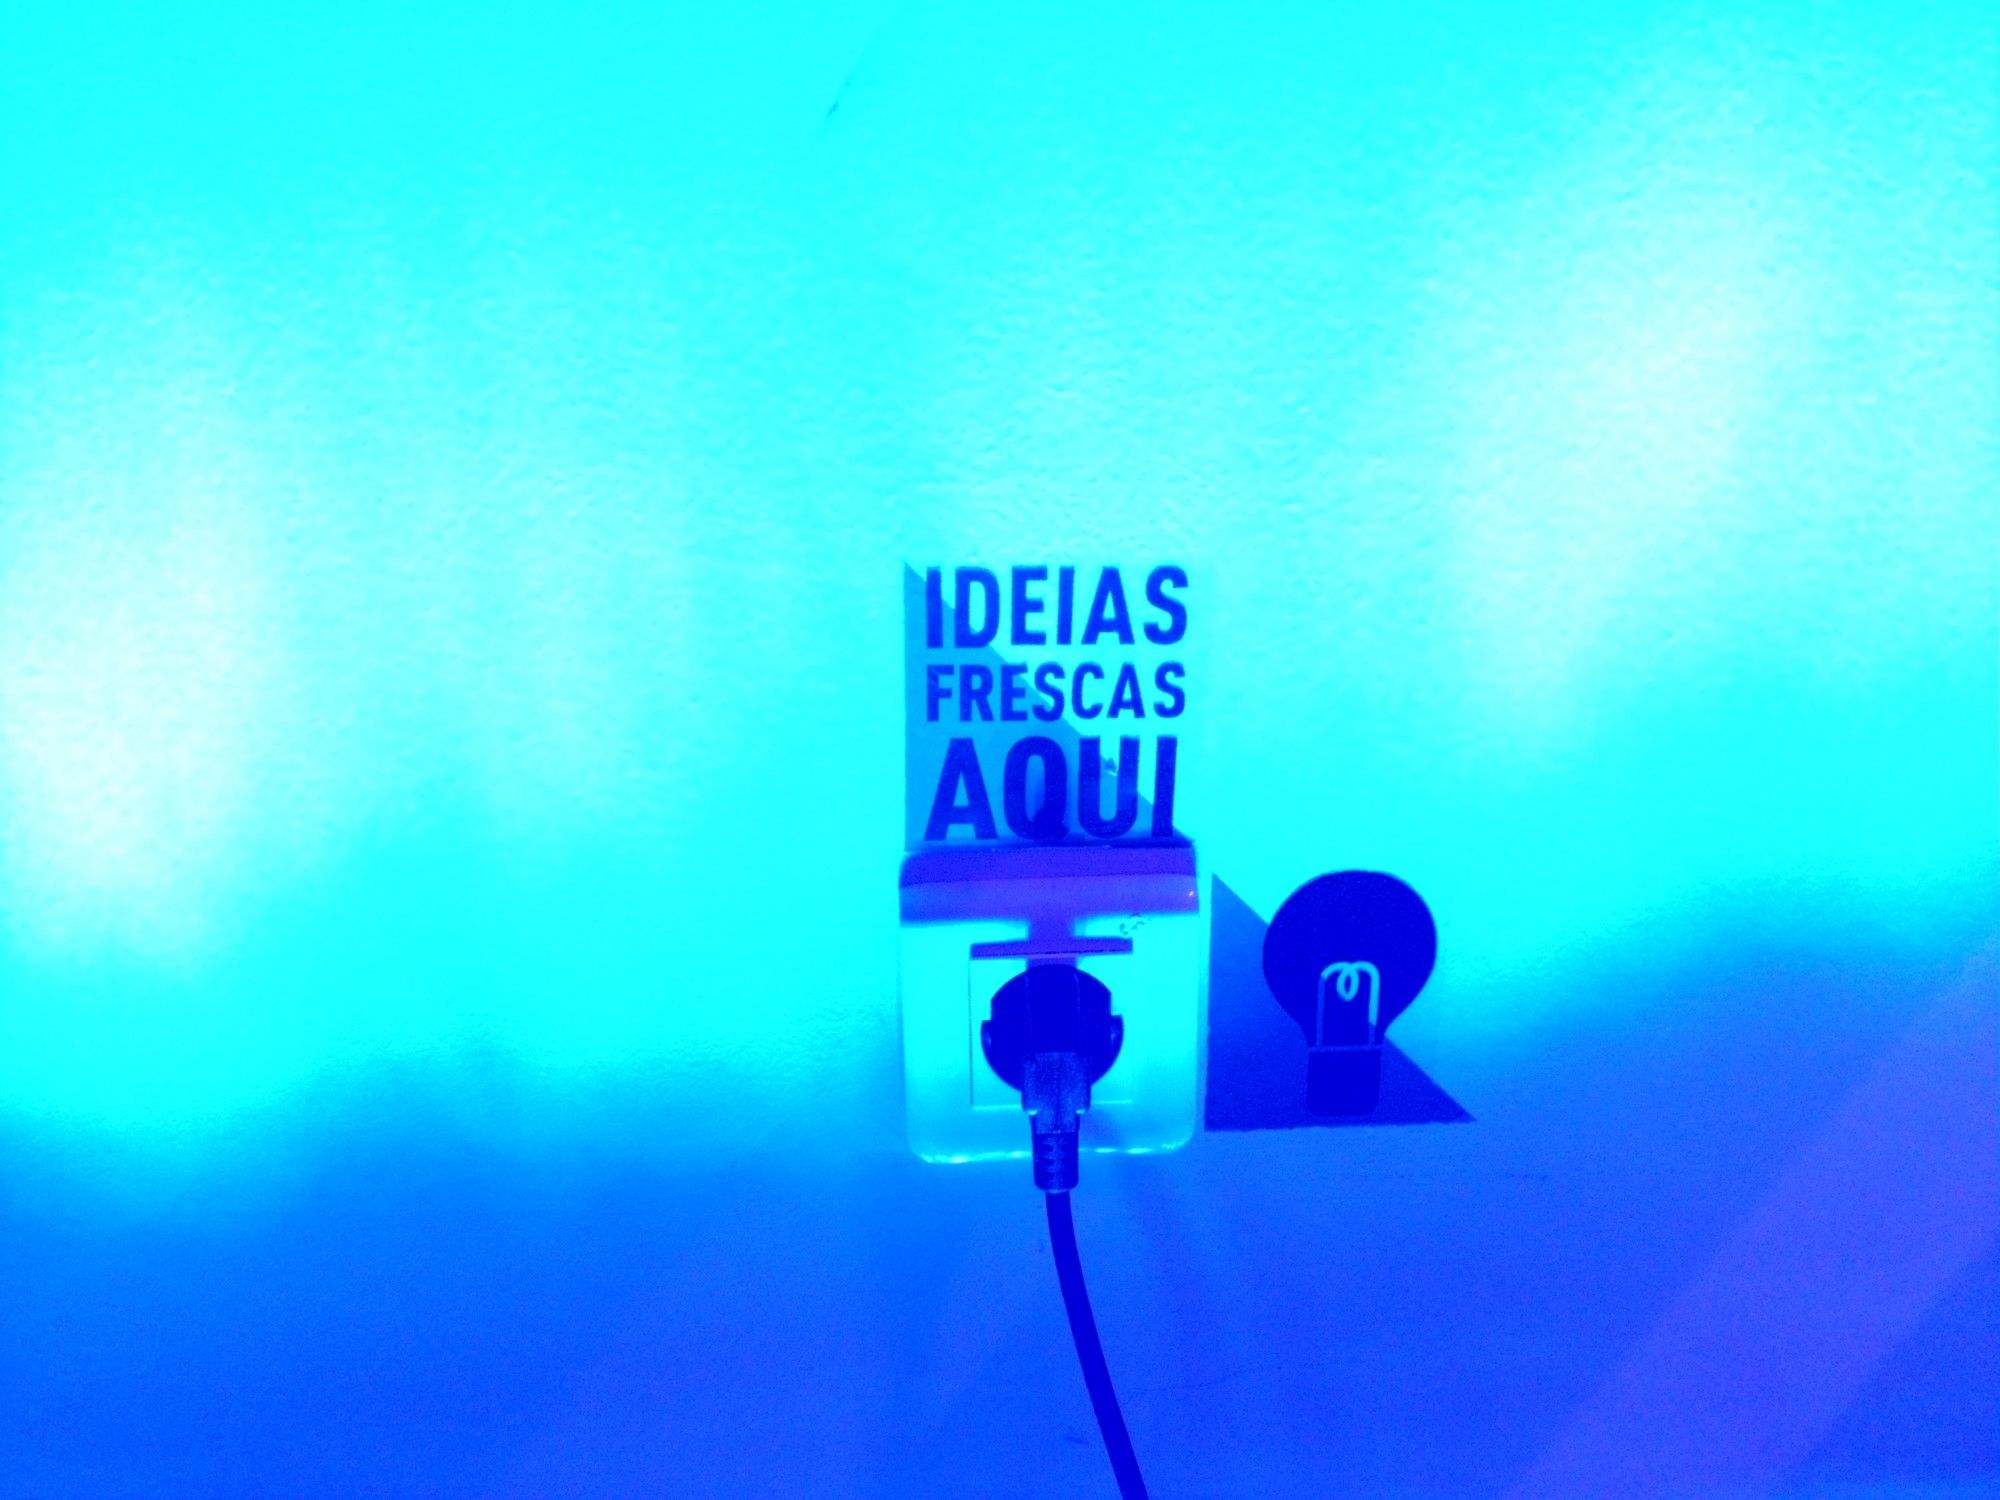 &lsquo;Fresh ideas here&rsquo; at Startup Lisboa